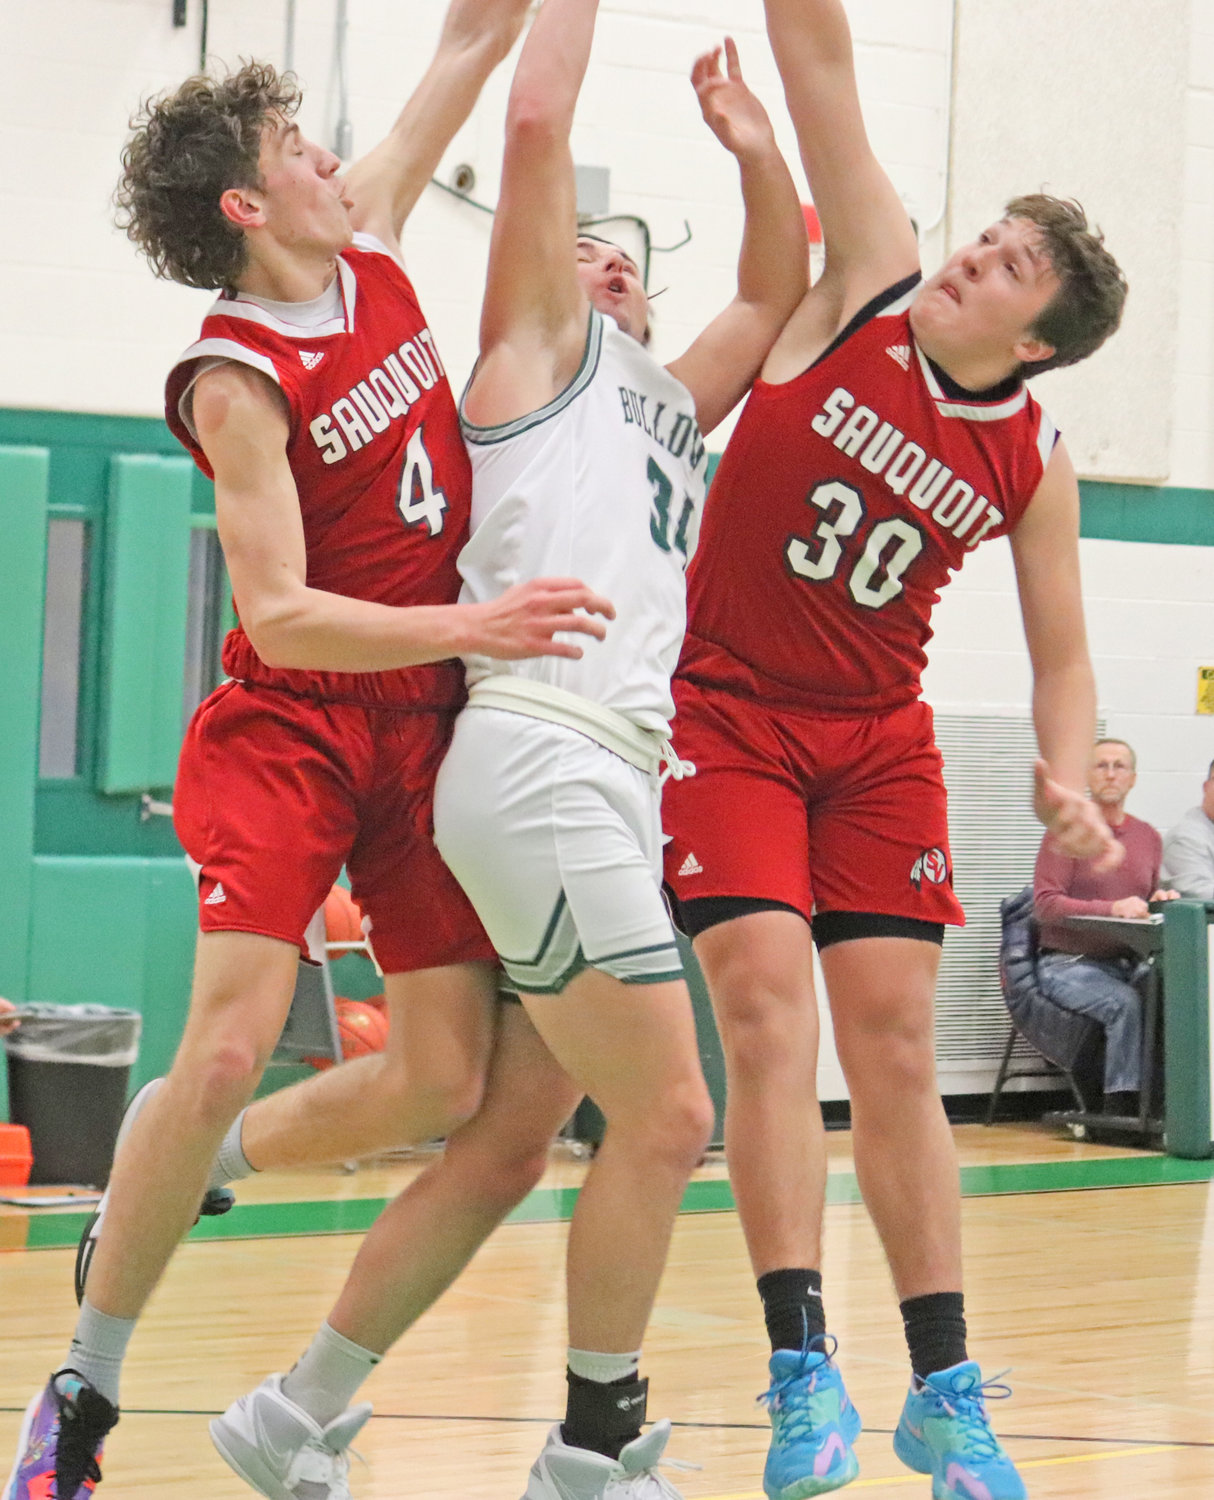 Payton Livingston of Westmoreland goes up between Sauquoit Valley's James Henck, left, and Aiden McKenney. Livingston scored 12 in the team's 57-54 overtime win at home.